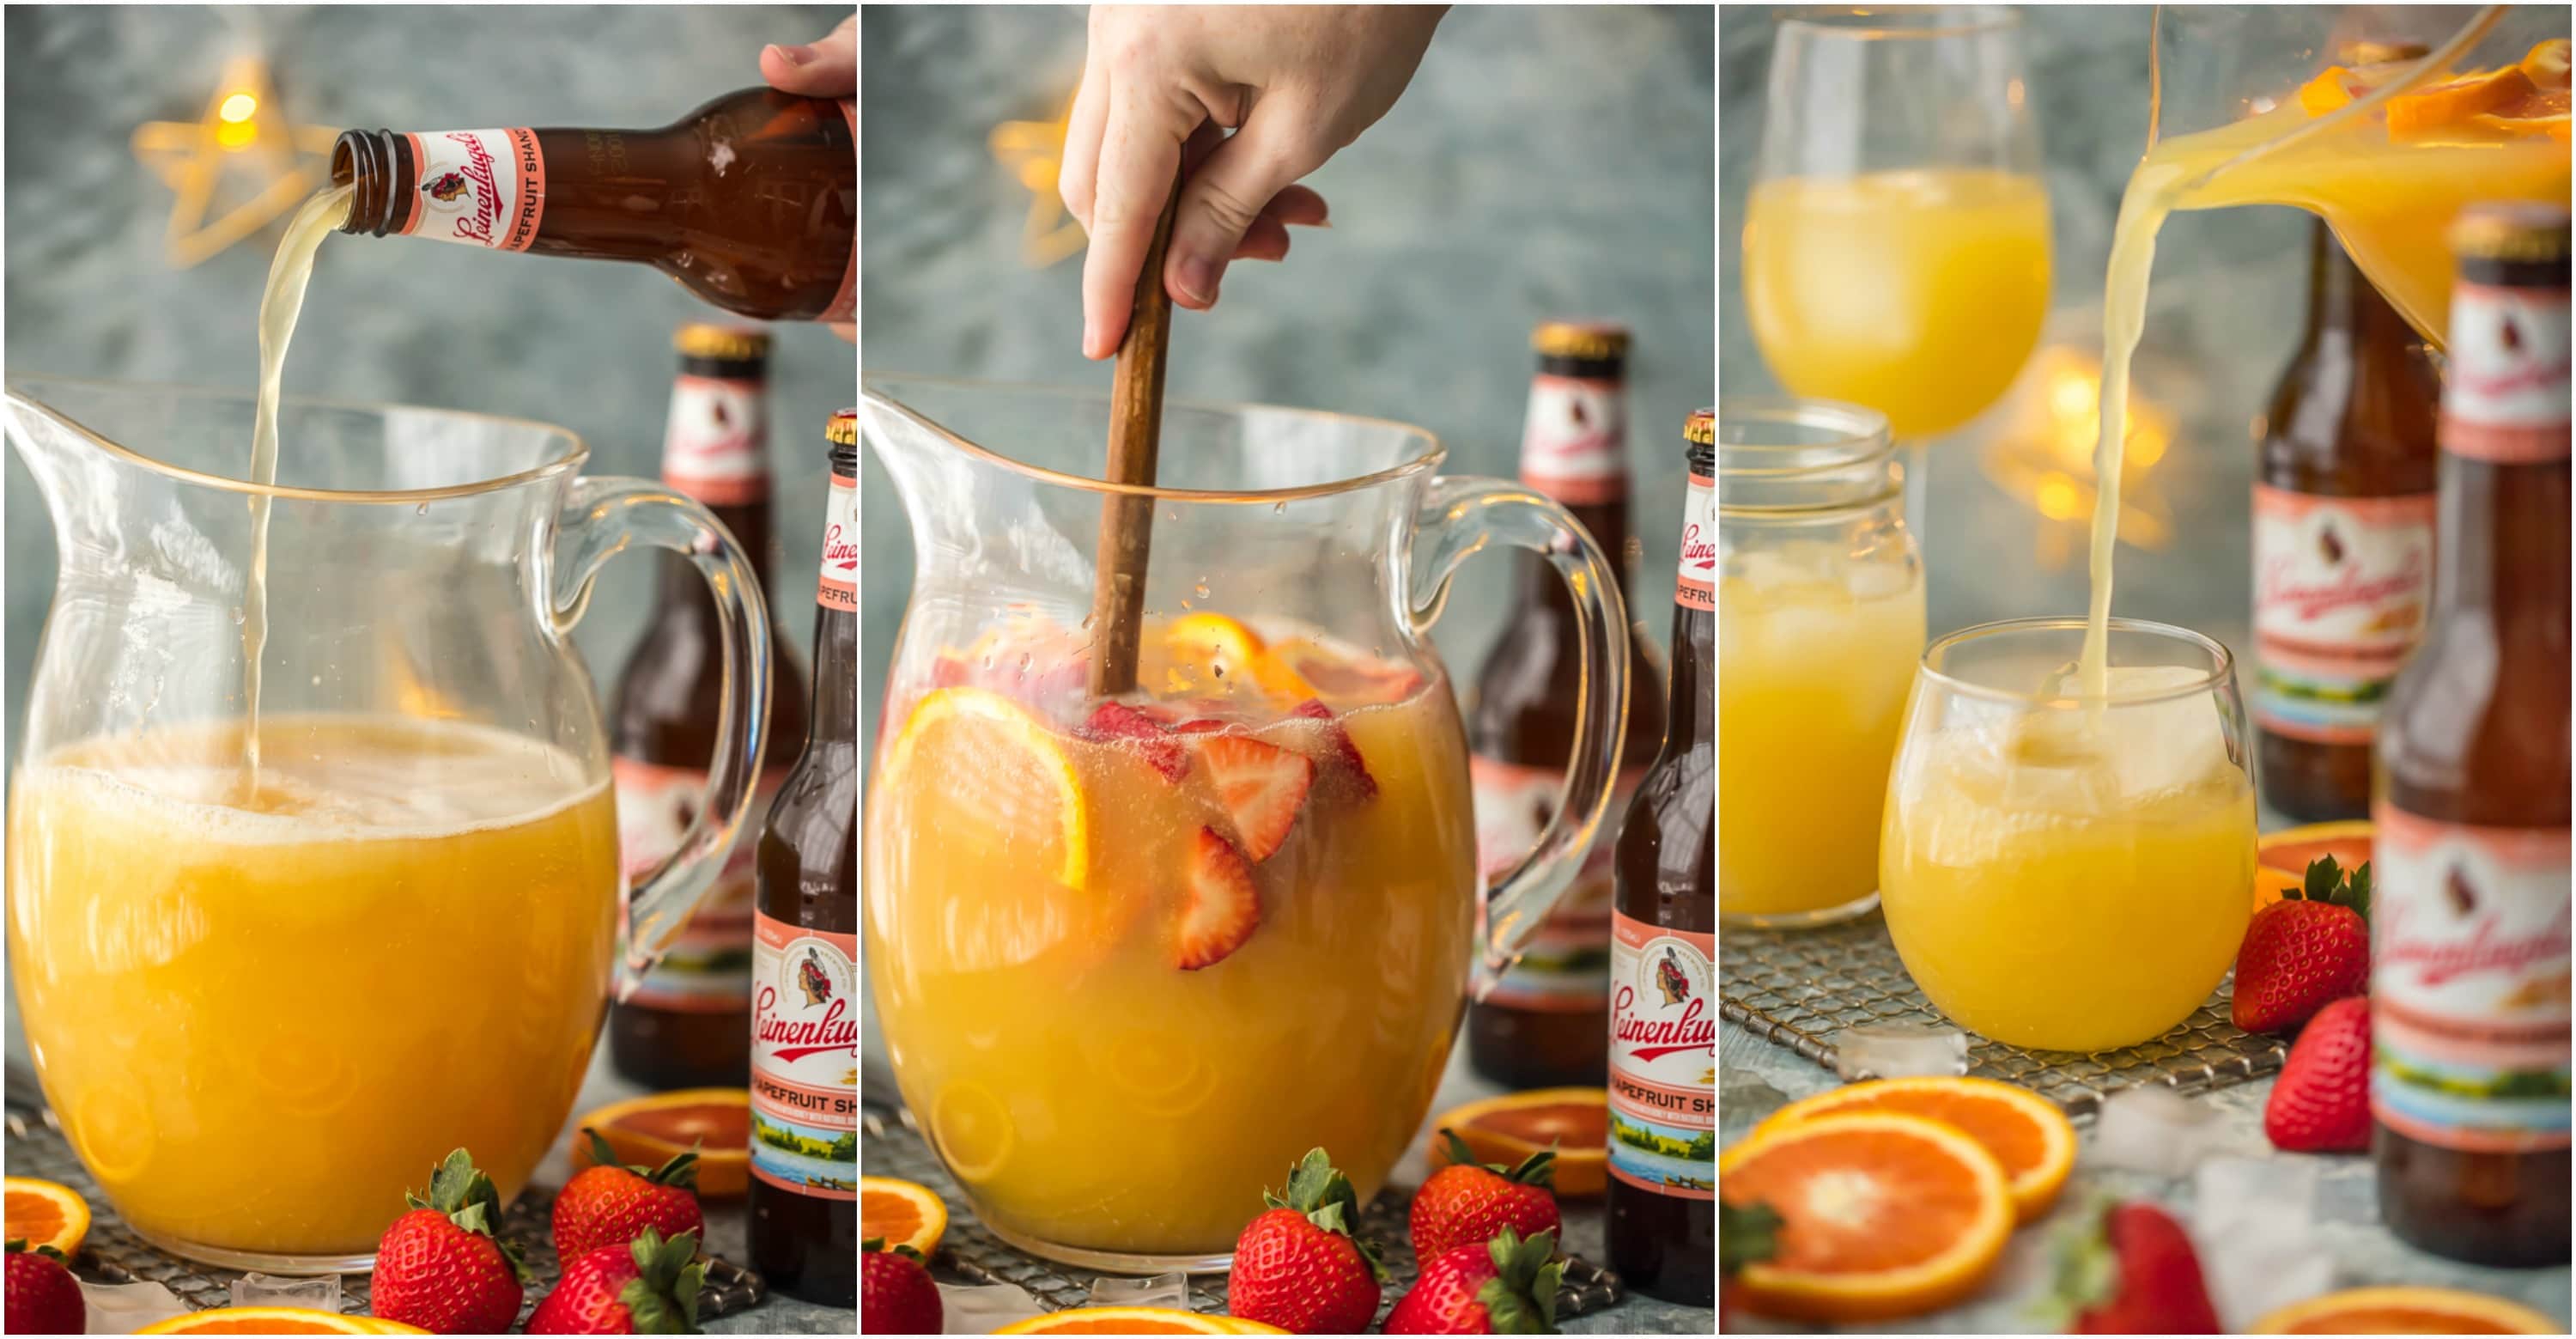 process of grapefruit beer sangria being made in pitcher